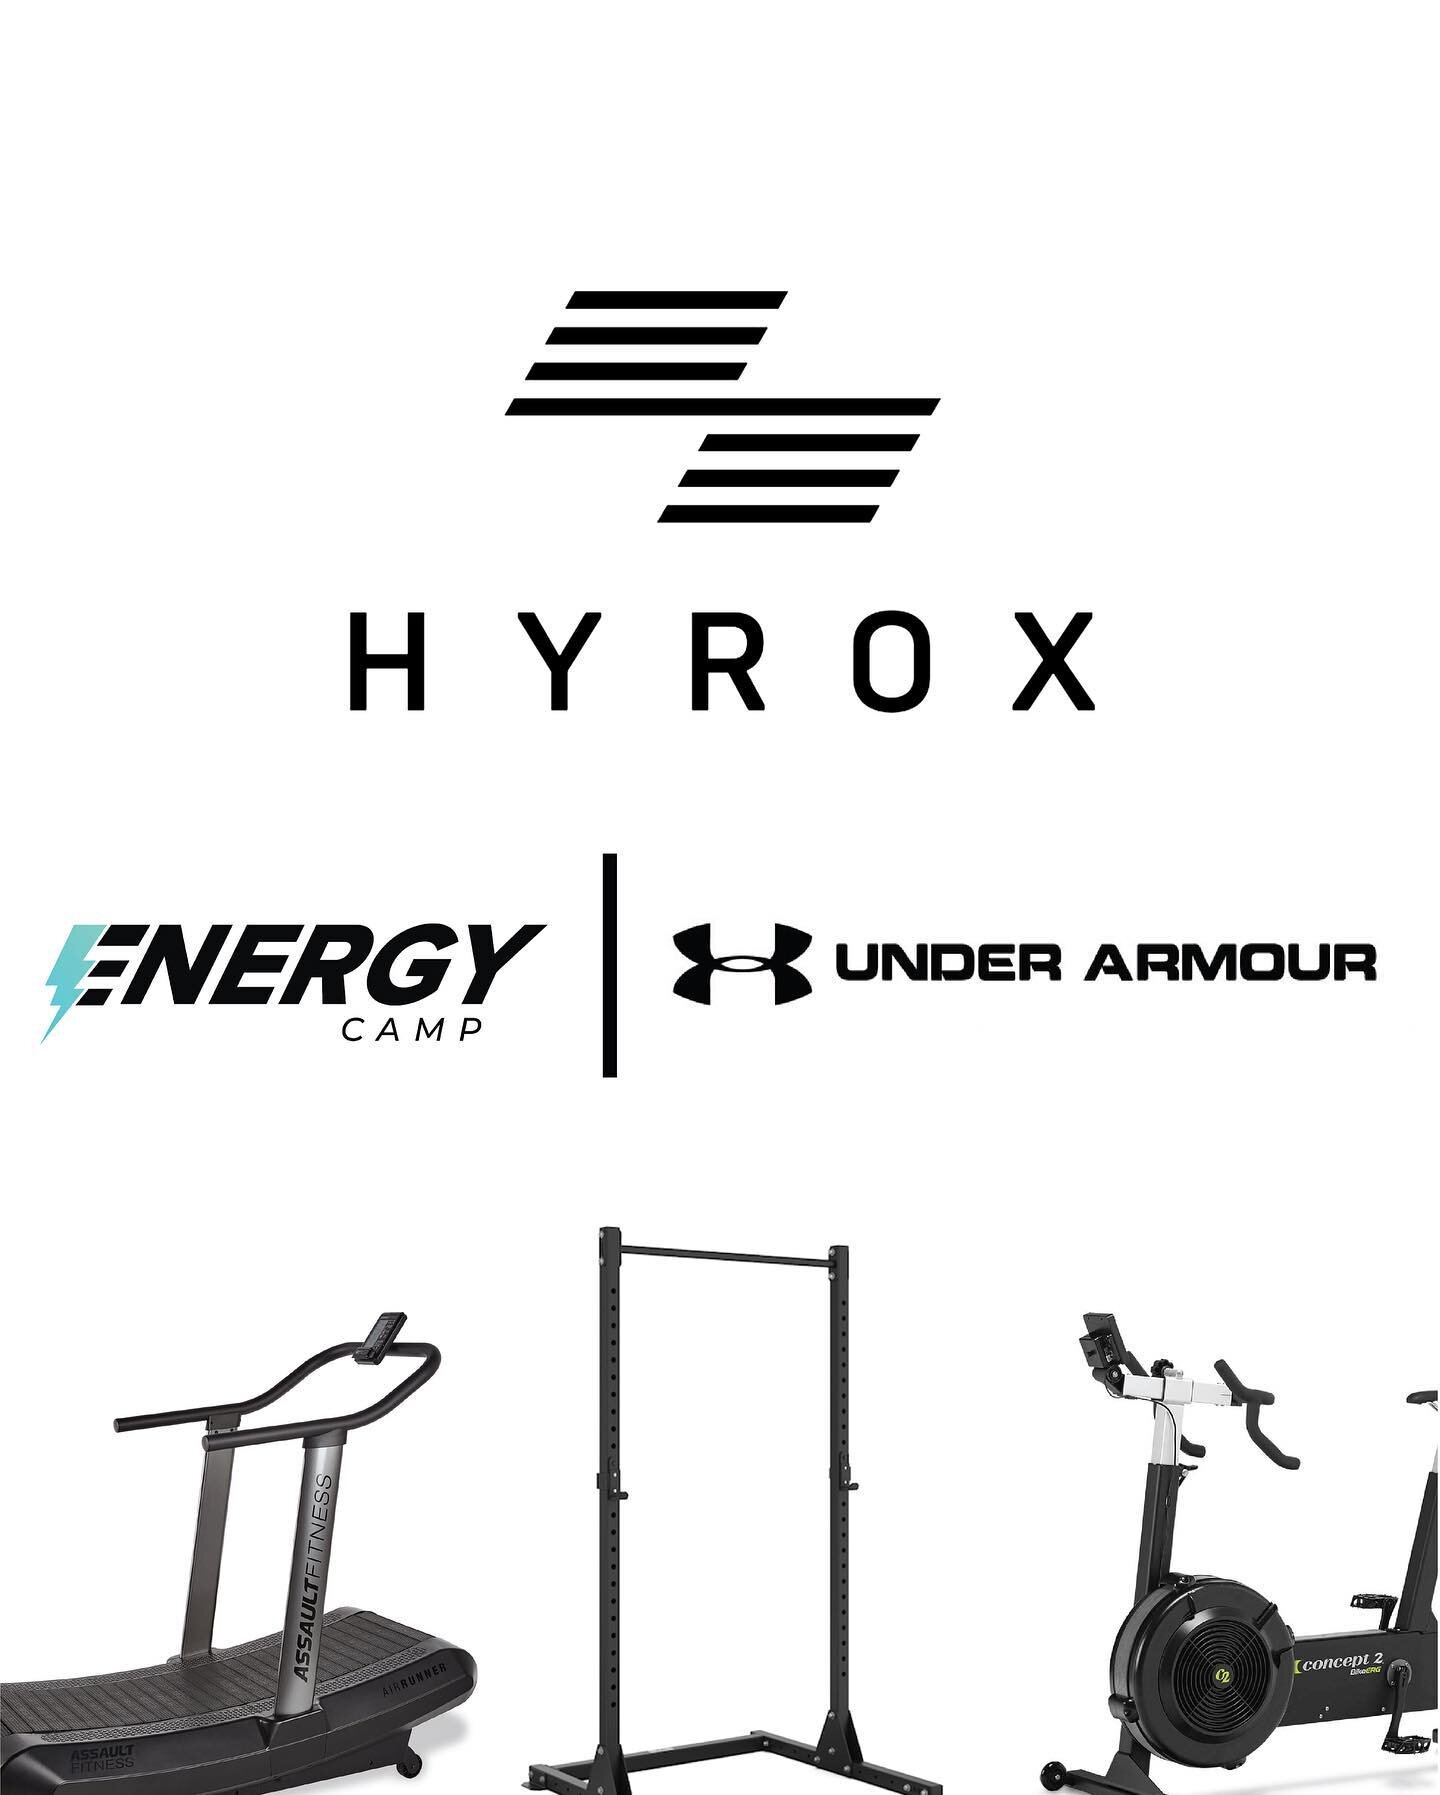 WE GO WHERE THE HYPE GOES! Who&rsquo;s excited for HYROX DXB today? We&rsquo;re so stoked to activate the Under Armour space with the incredible @underarmourme team 💥

Want a chance to win Under Armour and Energy Camp prizes? You don&rsquo;t want to